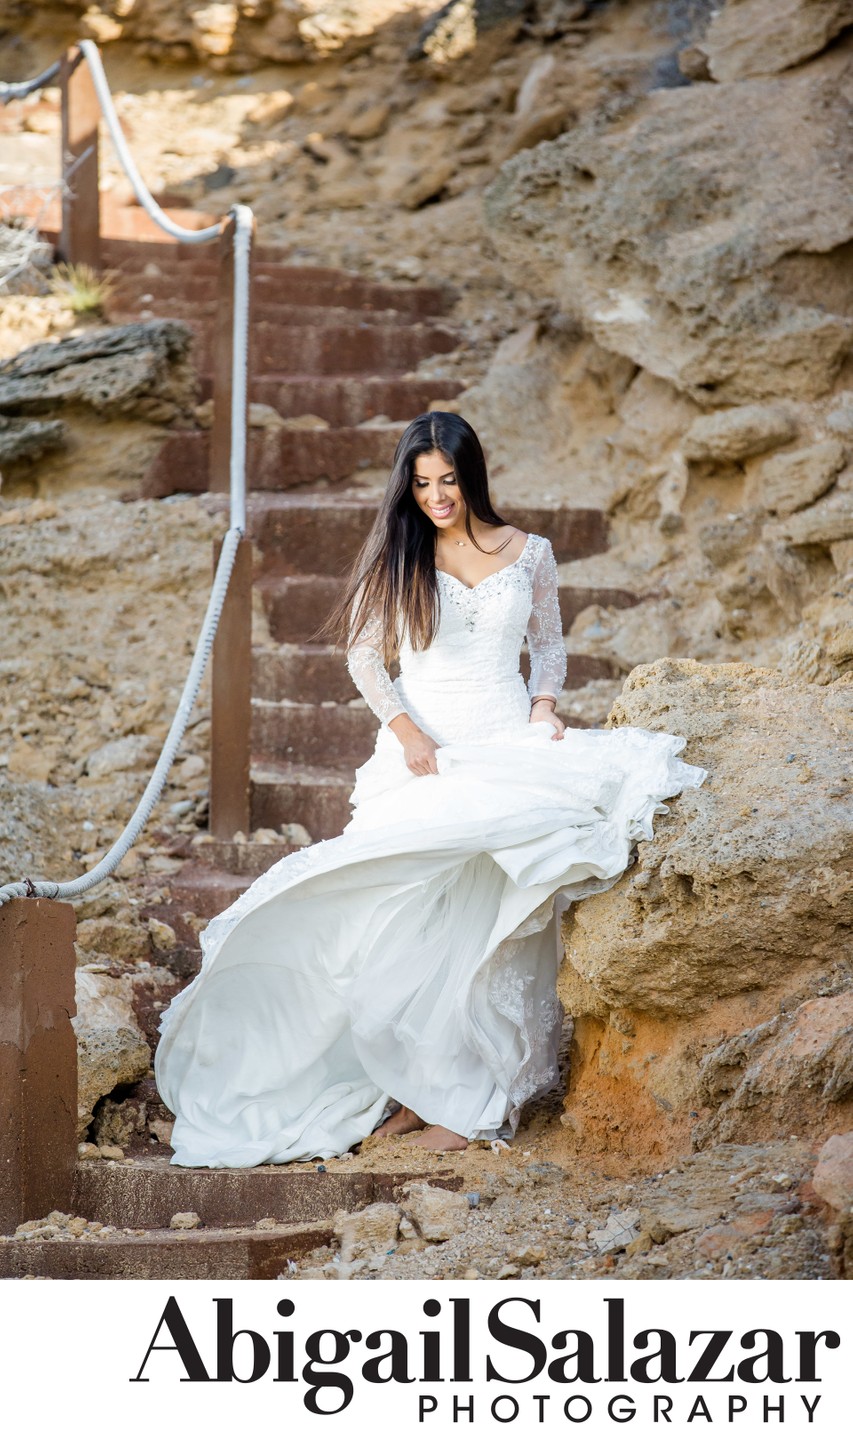 Barefoot bride walking down the stairs: Trash the dress